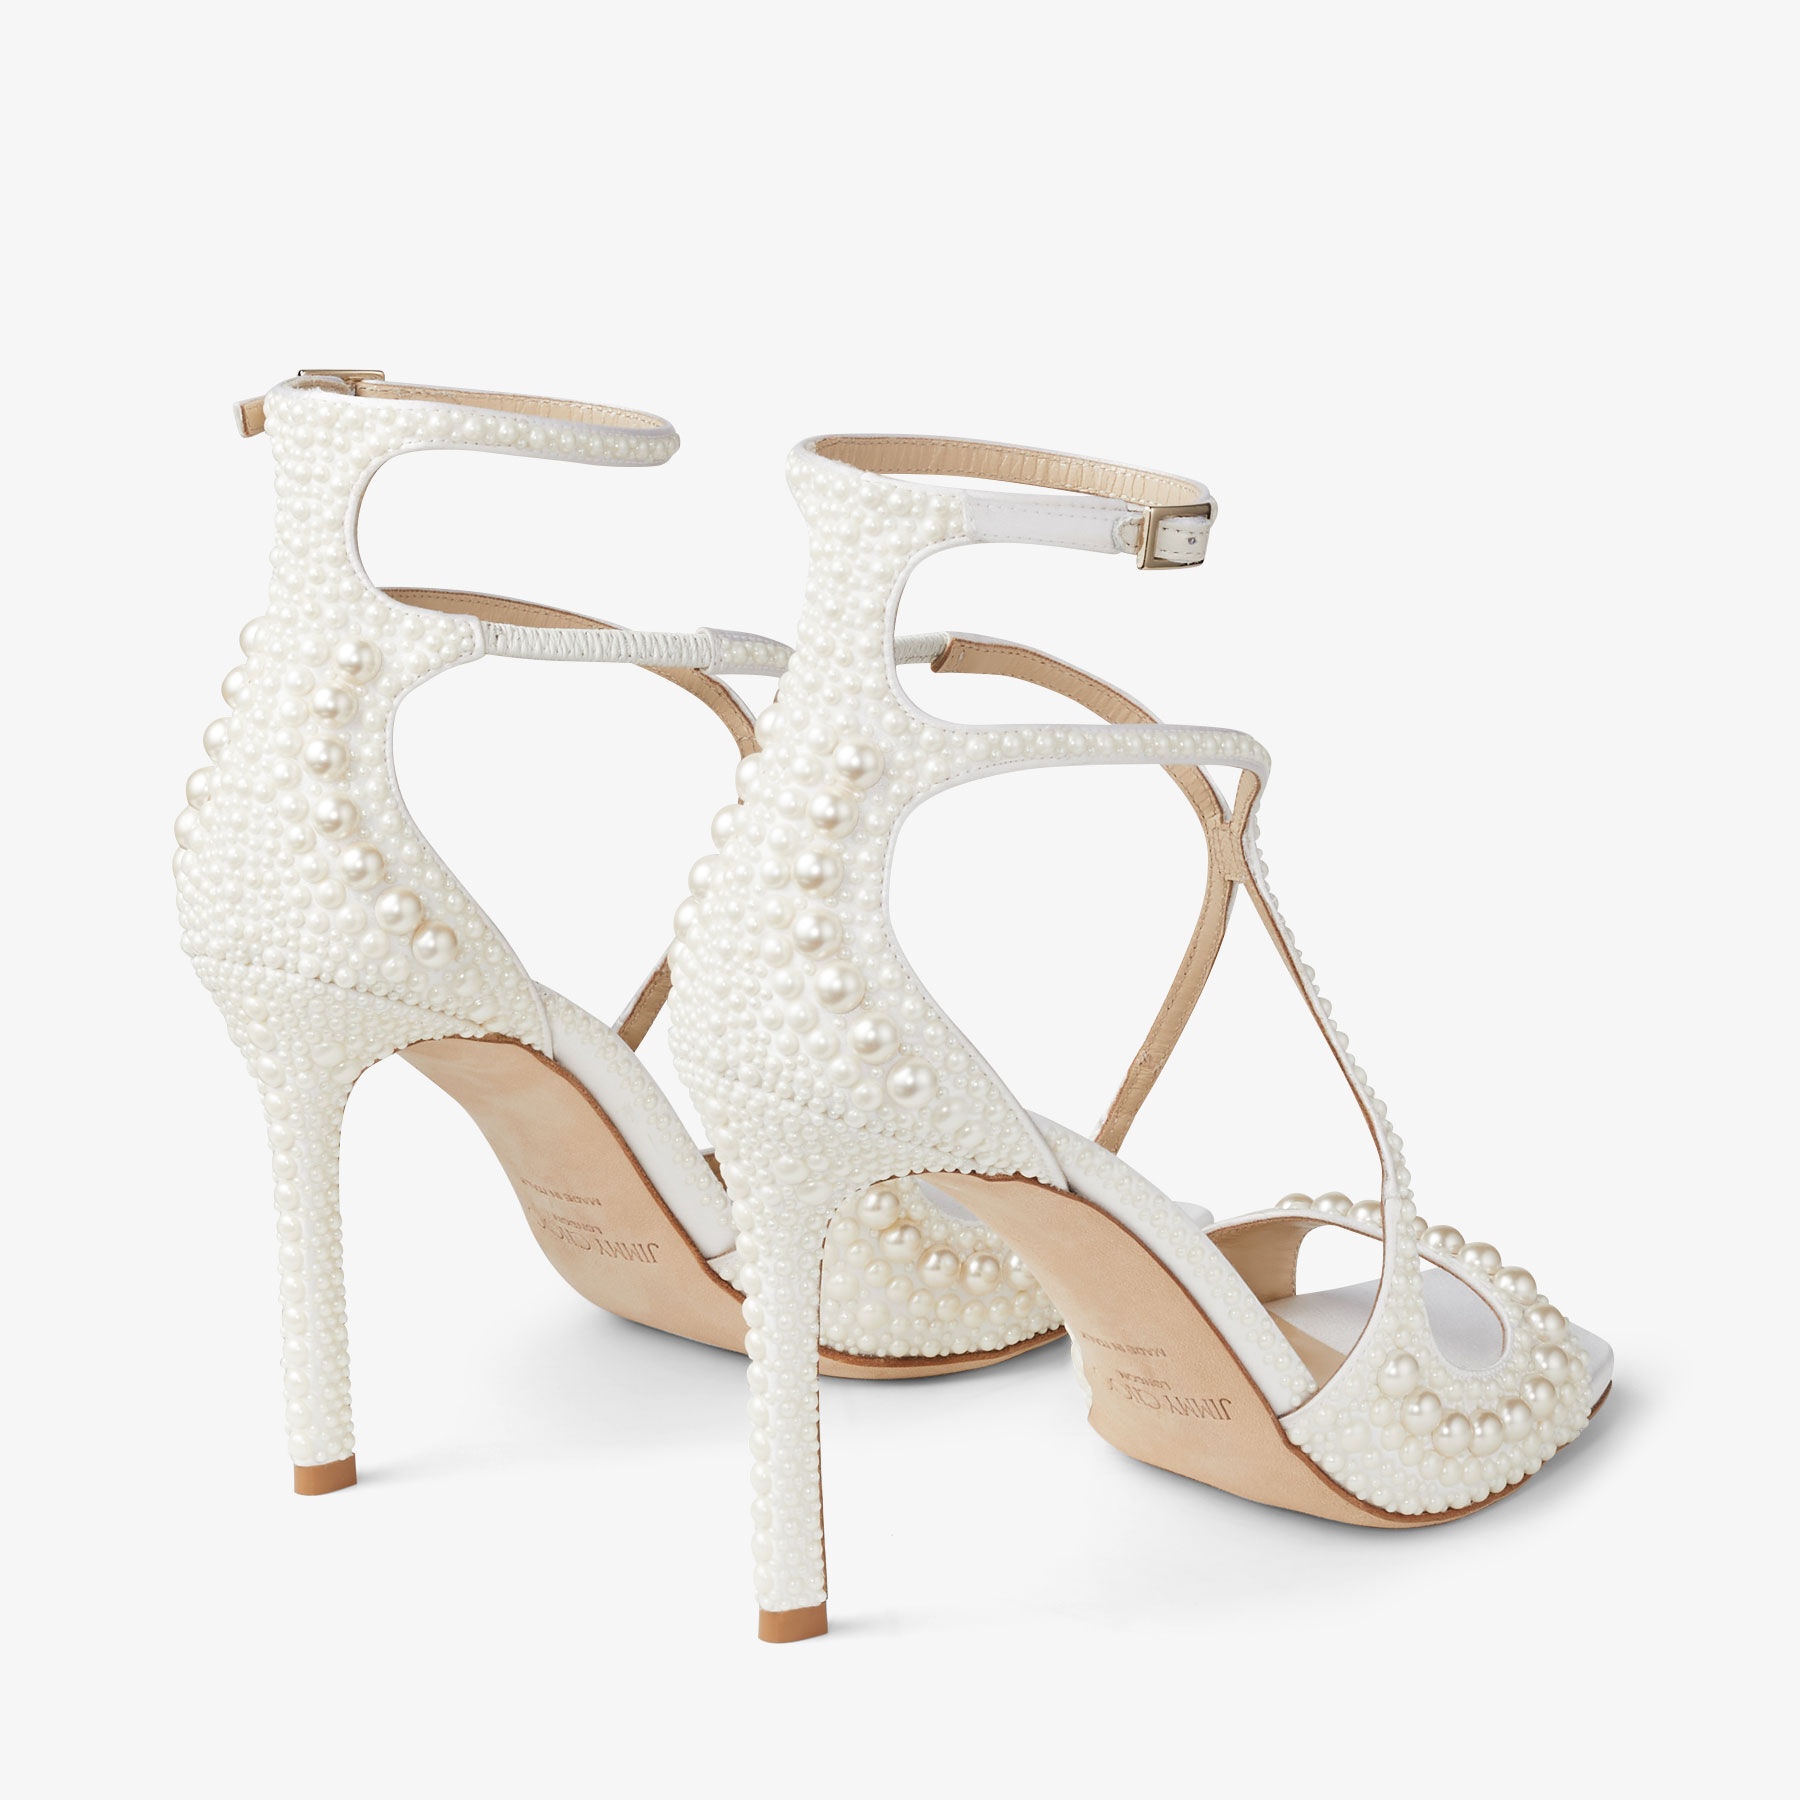 Azia 95
White Satin Sandals with All-Over Pearls - 5